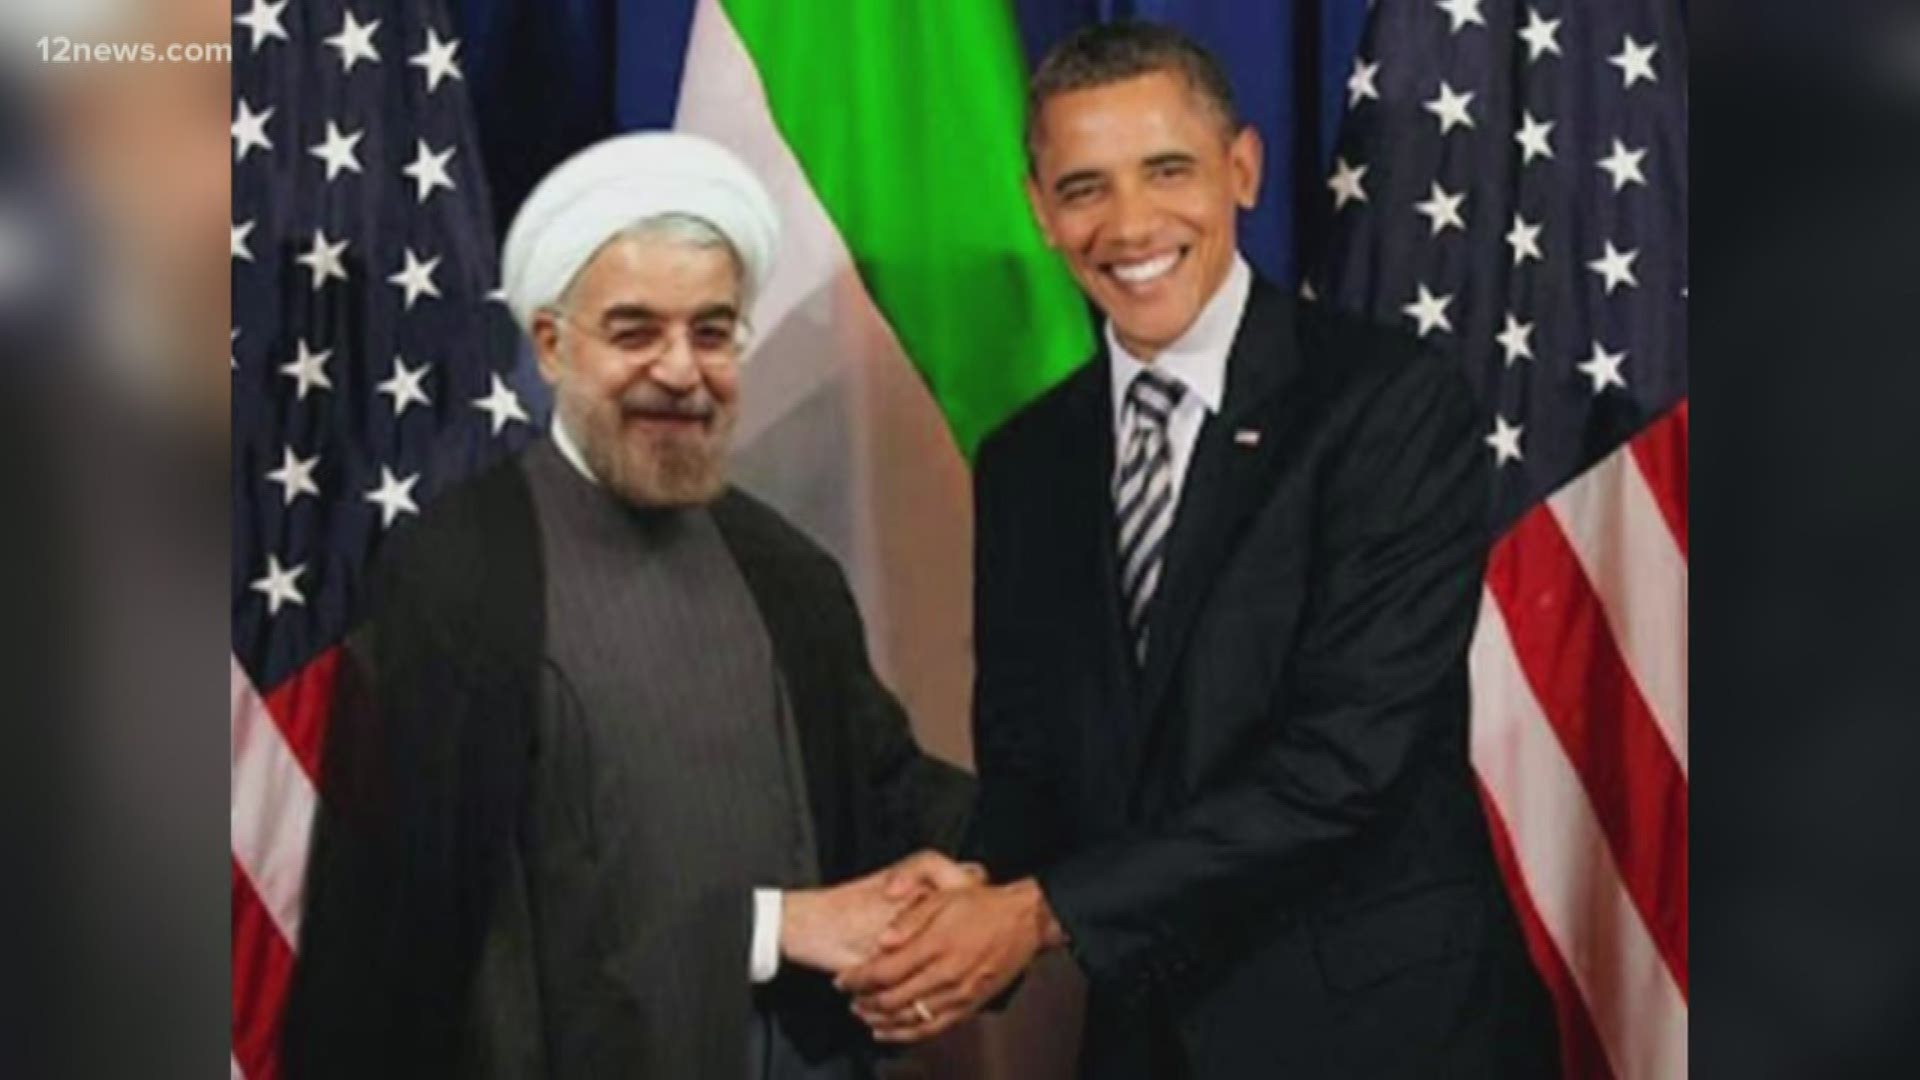 Arizona Congressman Paul Gosar tweeted out a picture of Pres. Obama shaking hands with Iranian Pres. Hass Rouhani. We verify if the photo is real or not.